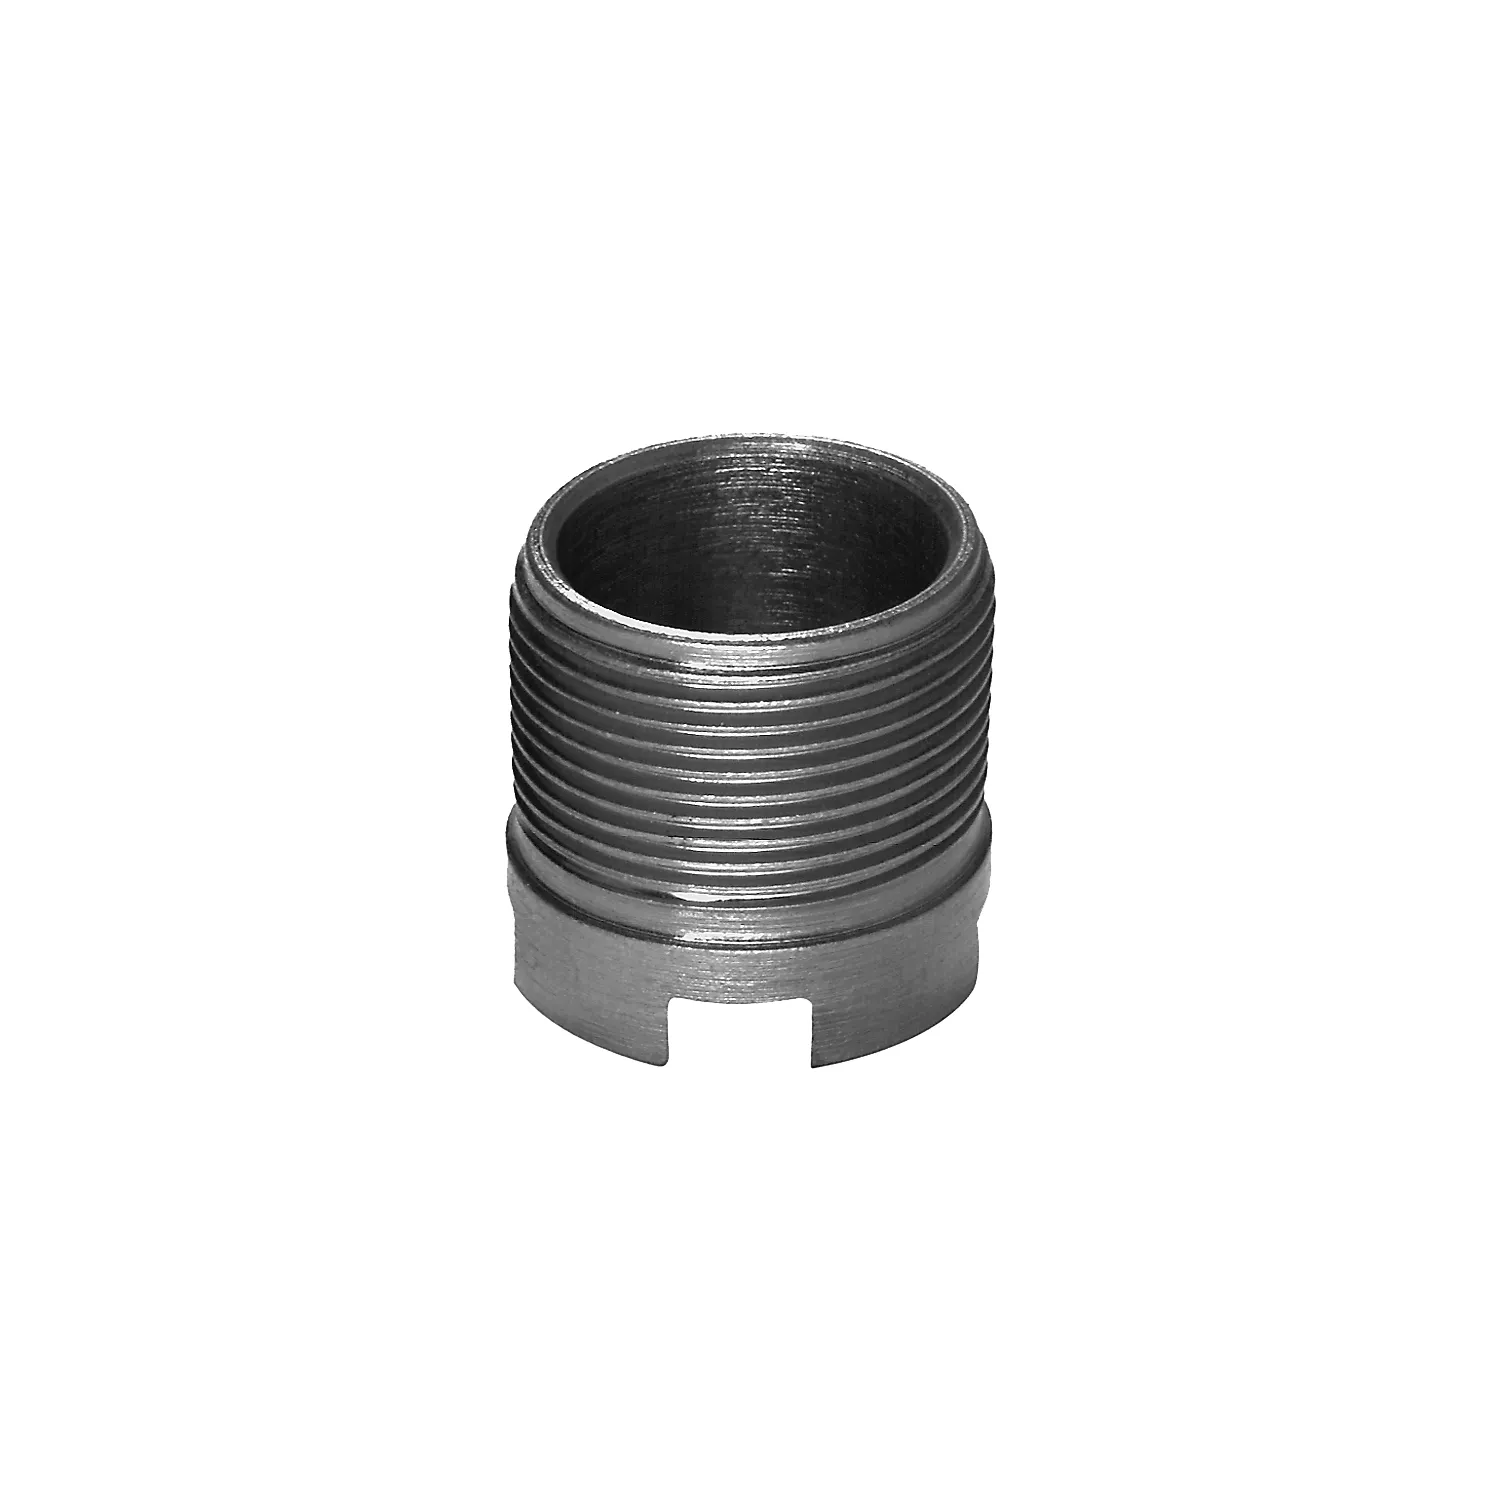 Clamping nut, nozzle holder